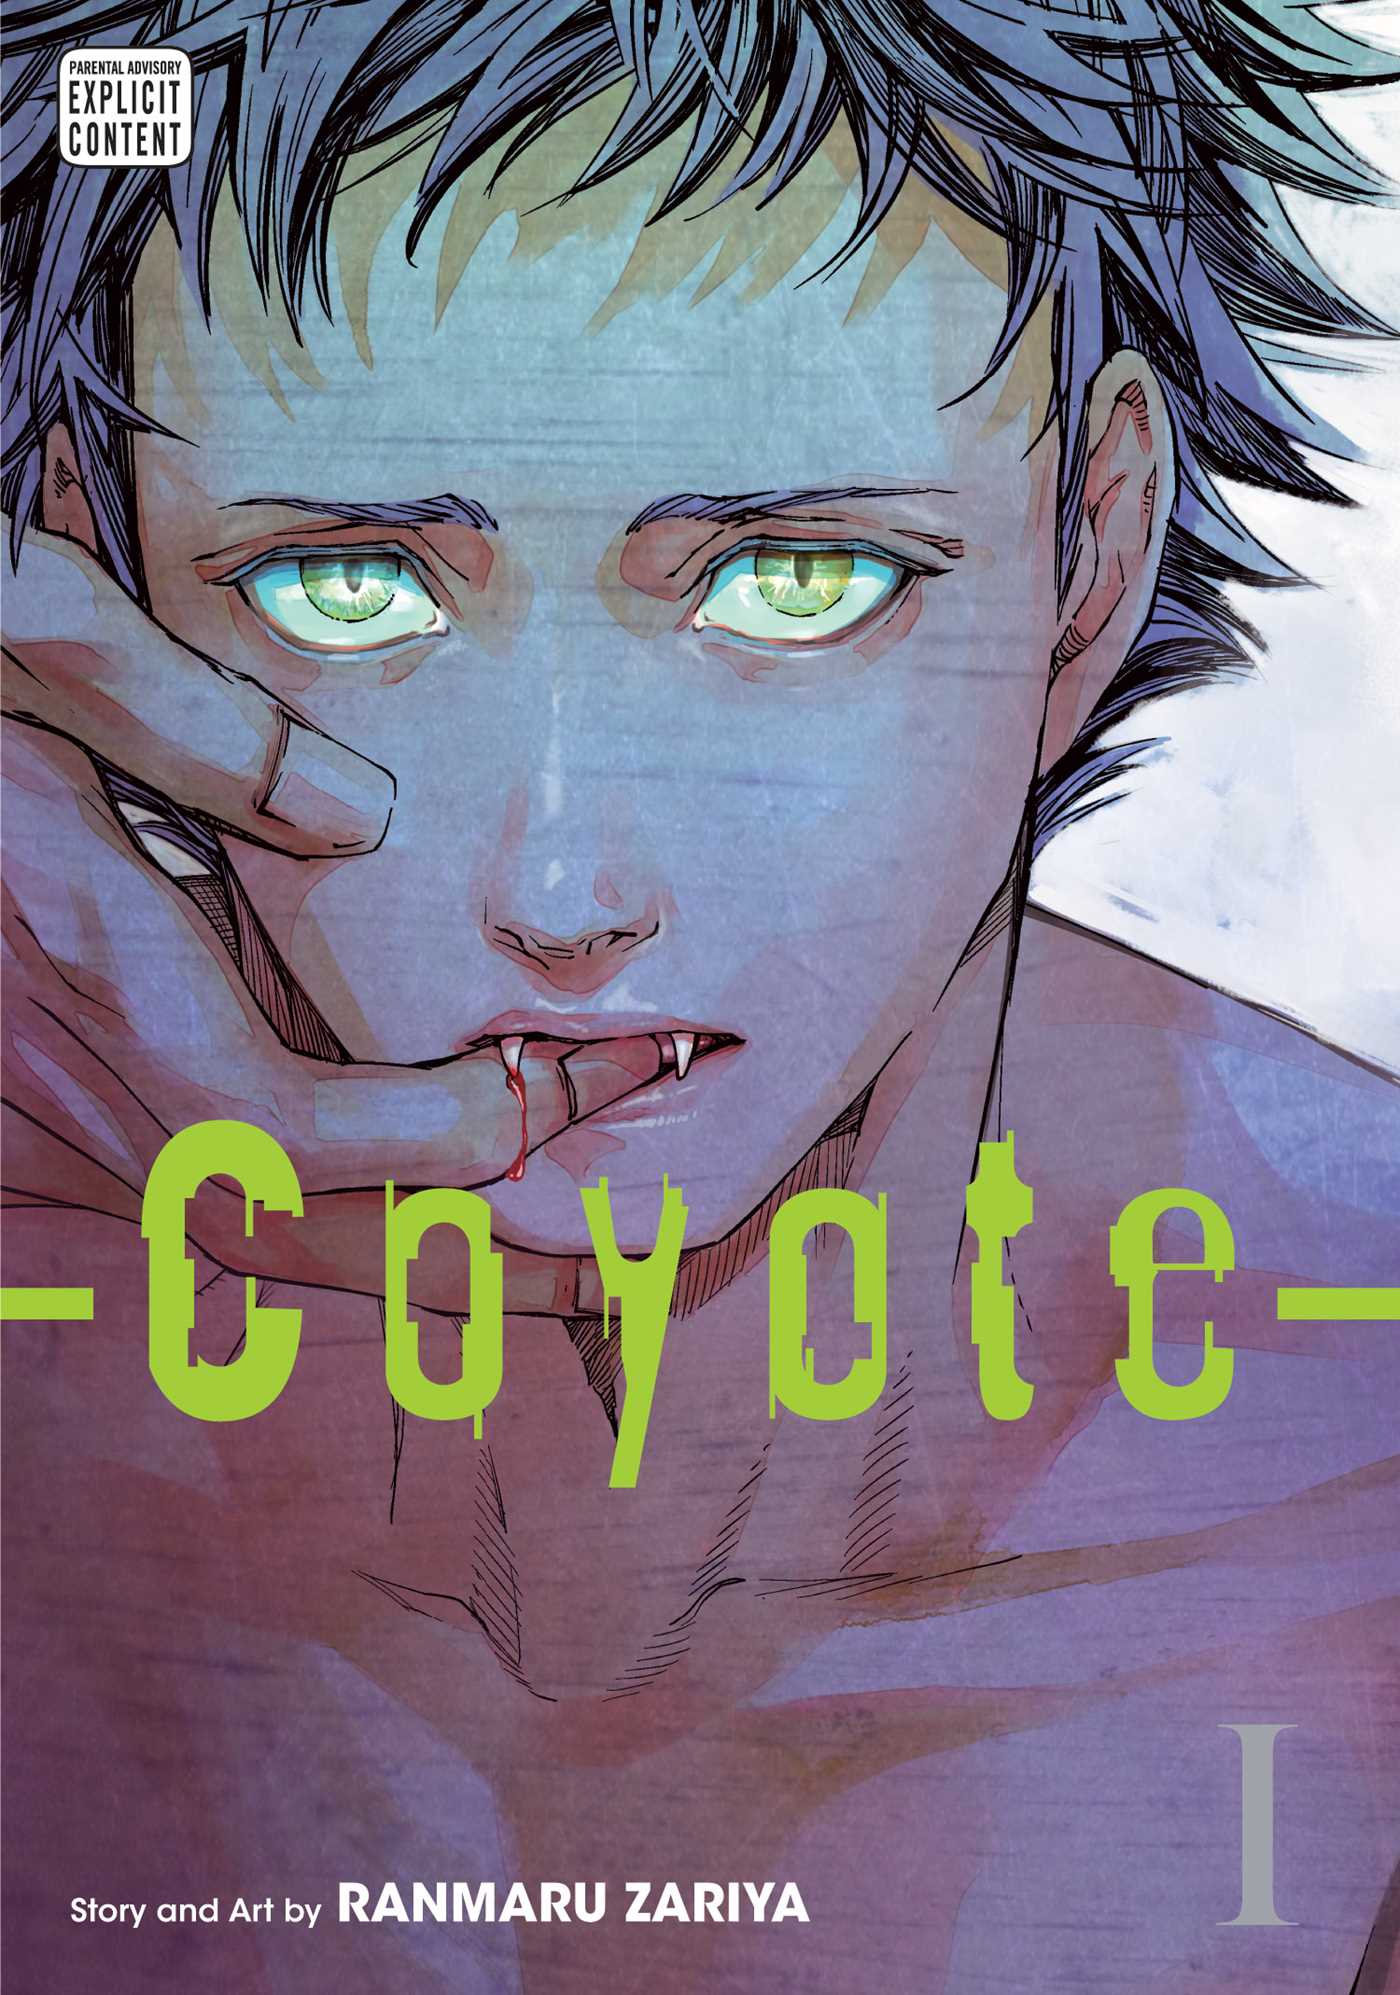 Coyote Vol. 1 Review